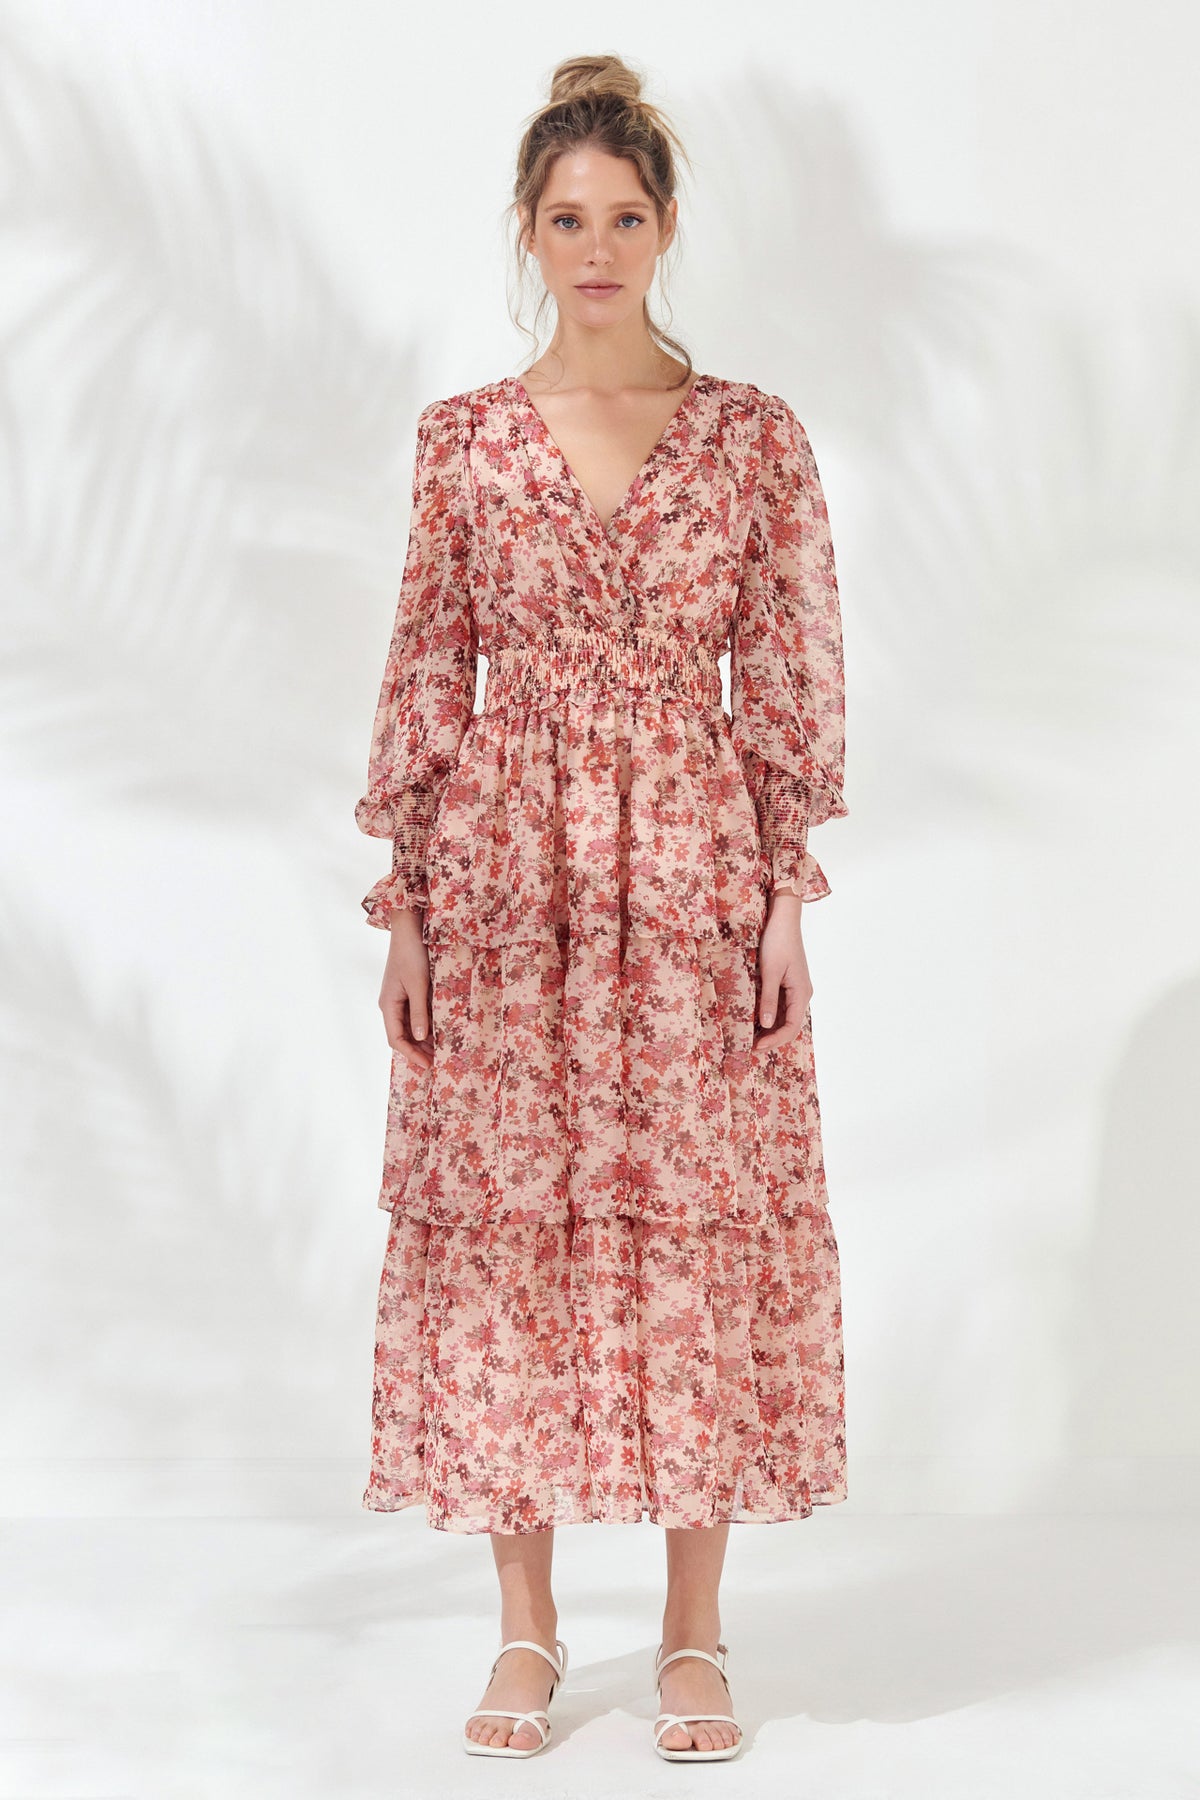 ENDLESS ROSE - Floral Long-Sleeve Maxi Dress - DRESSES available at Objectrare